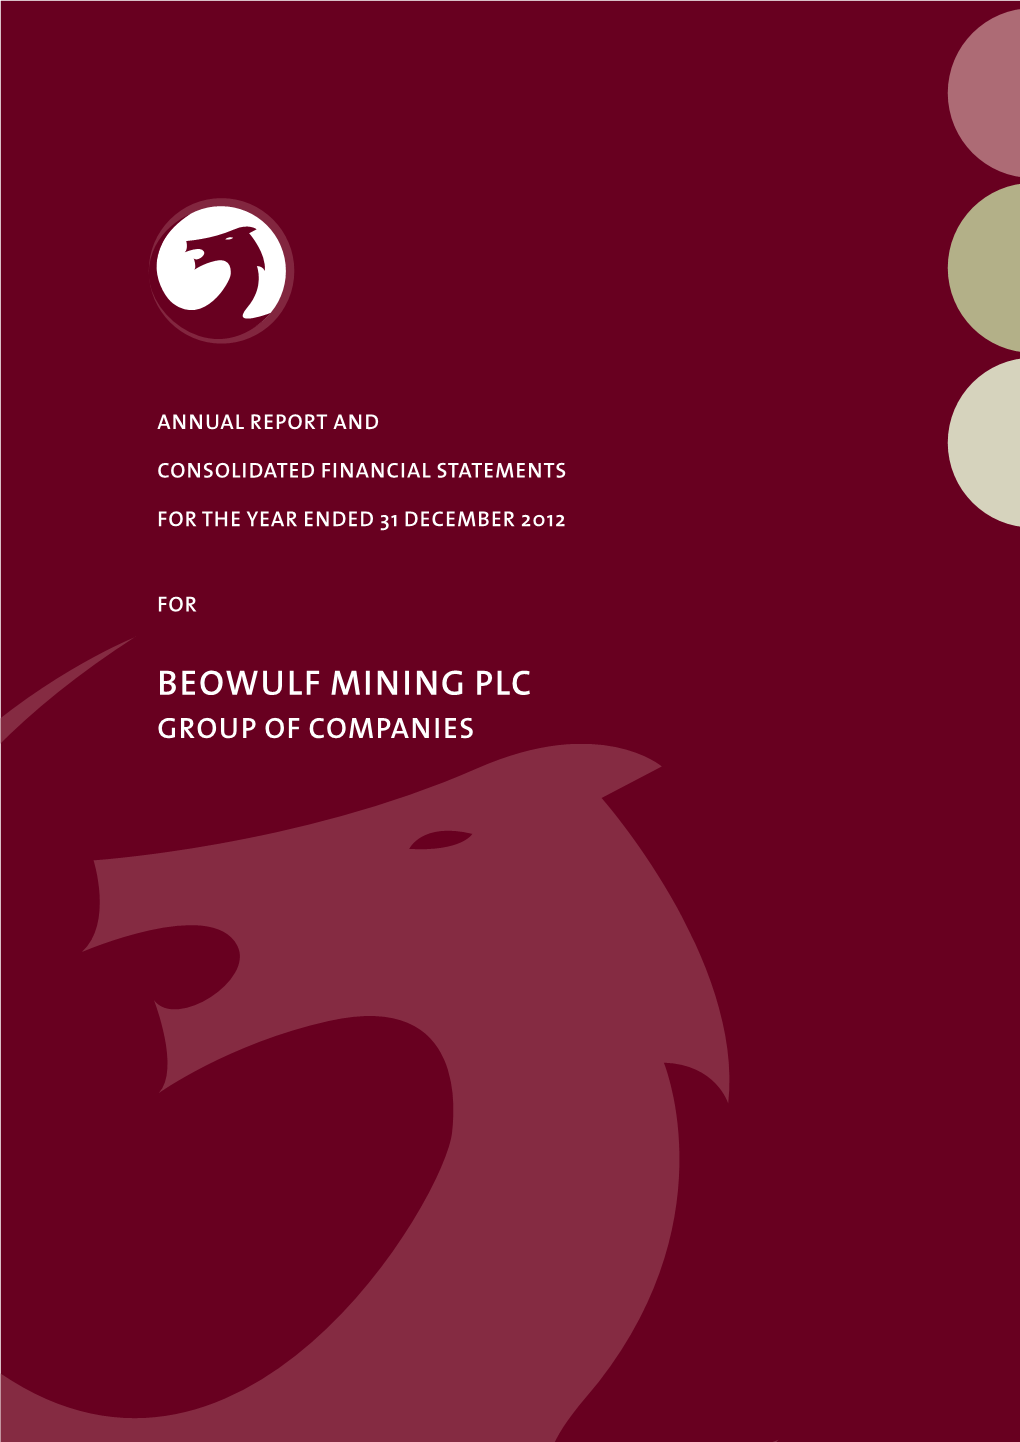 Beowulf Mining Plc Group of Companies